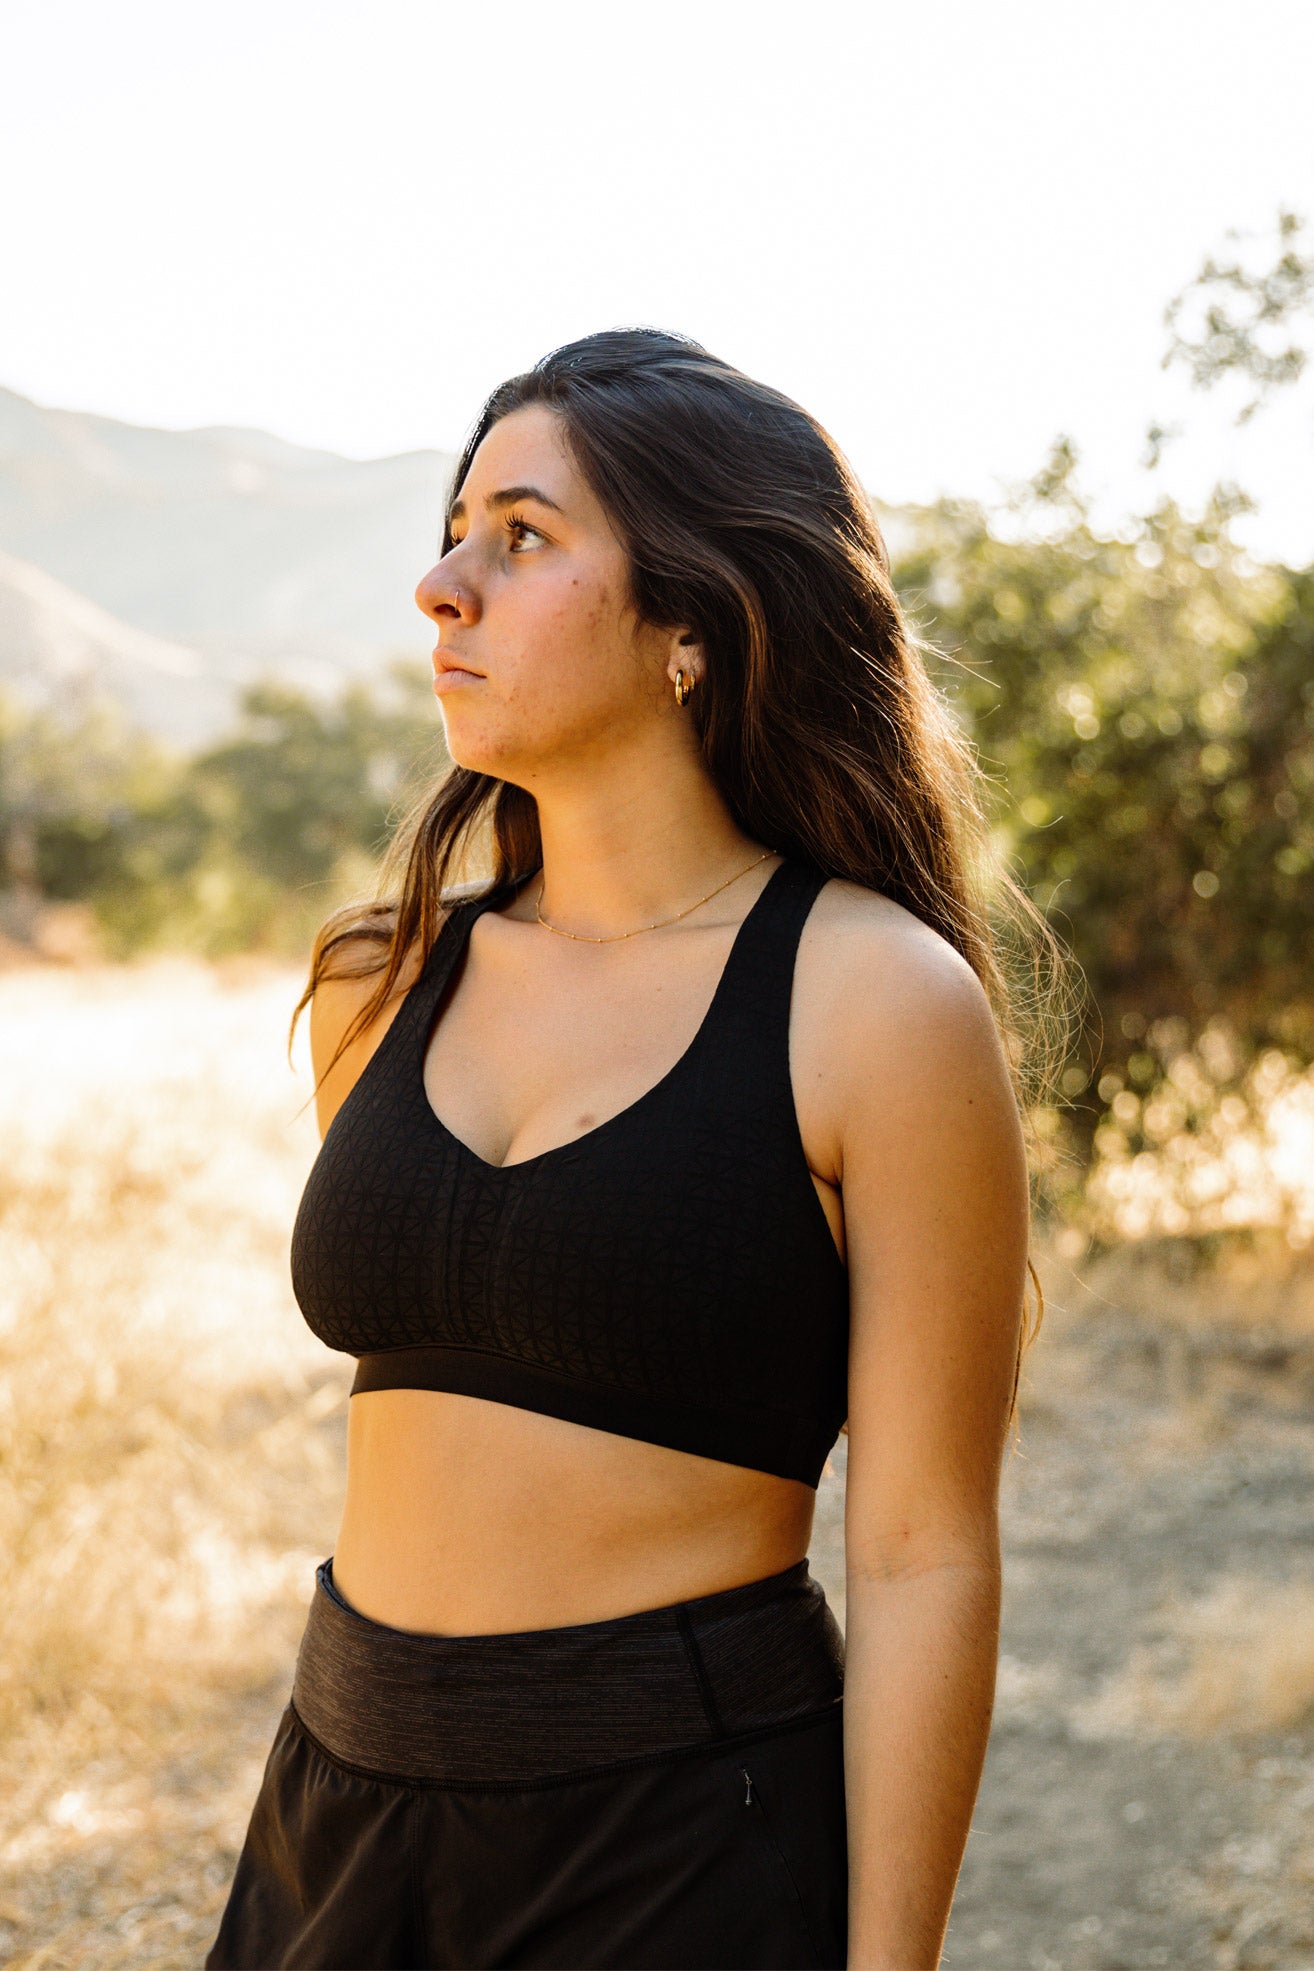 Lume Six Makes the Most Comfortable, Effective, and Overall Best Sports Bra  We Have Tested — Dad Gear Review